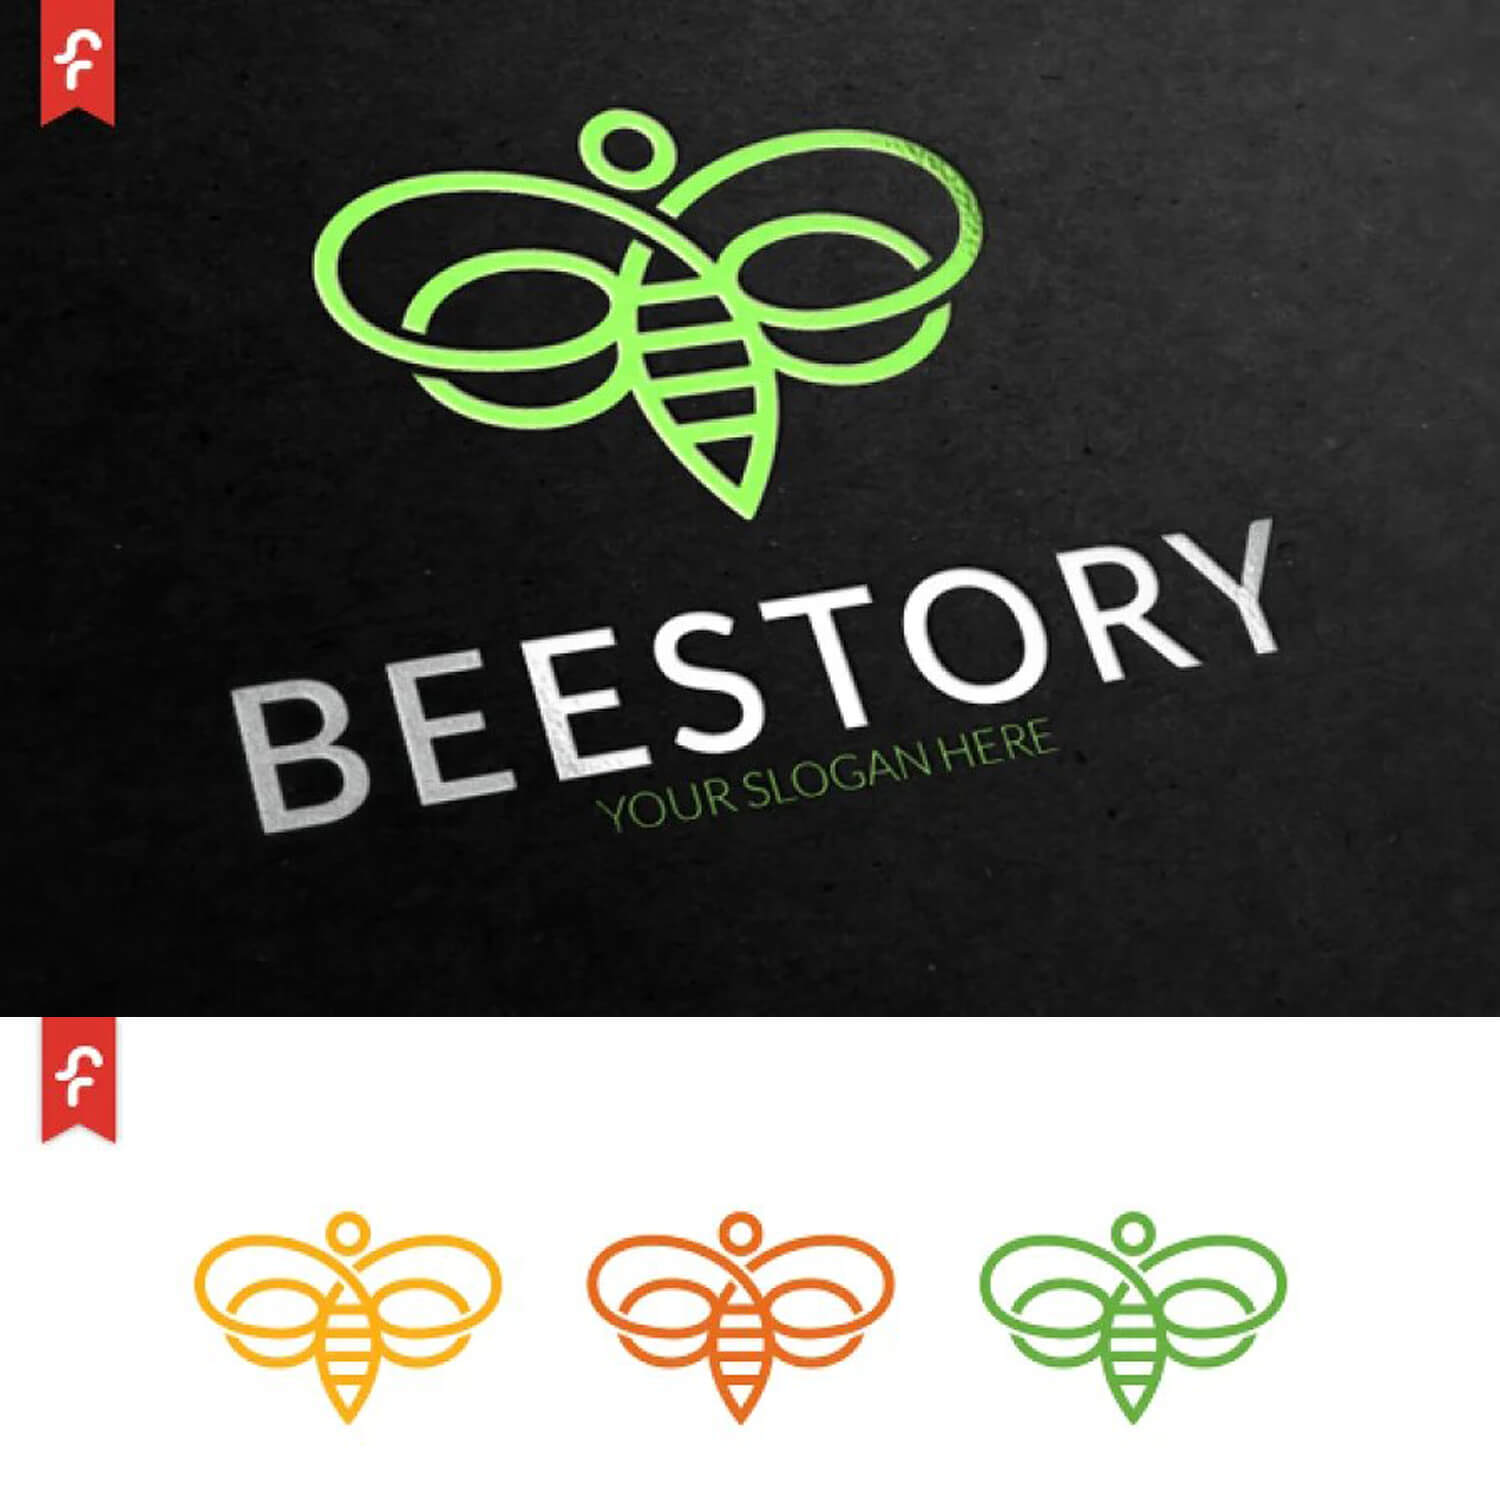 Color logos of beestory on a white background.